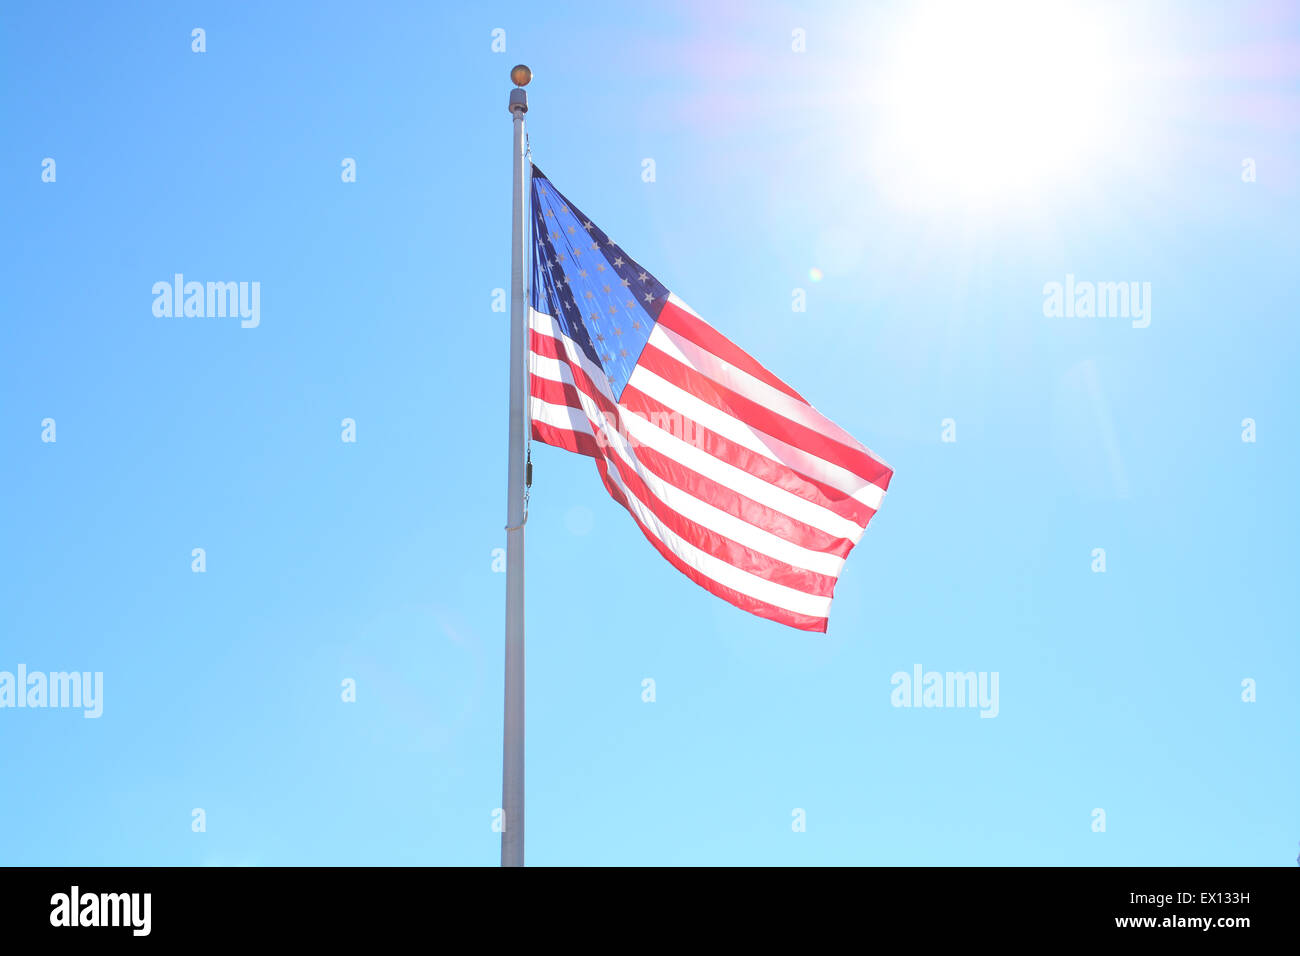 U.S. flag with a blue sky and the sun shining in the background Stock Photo